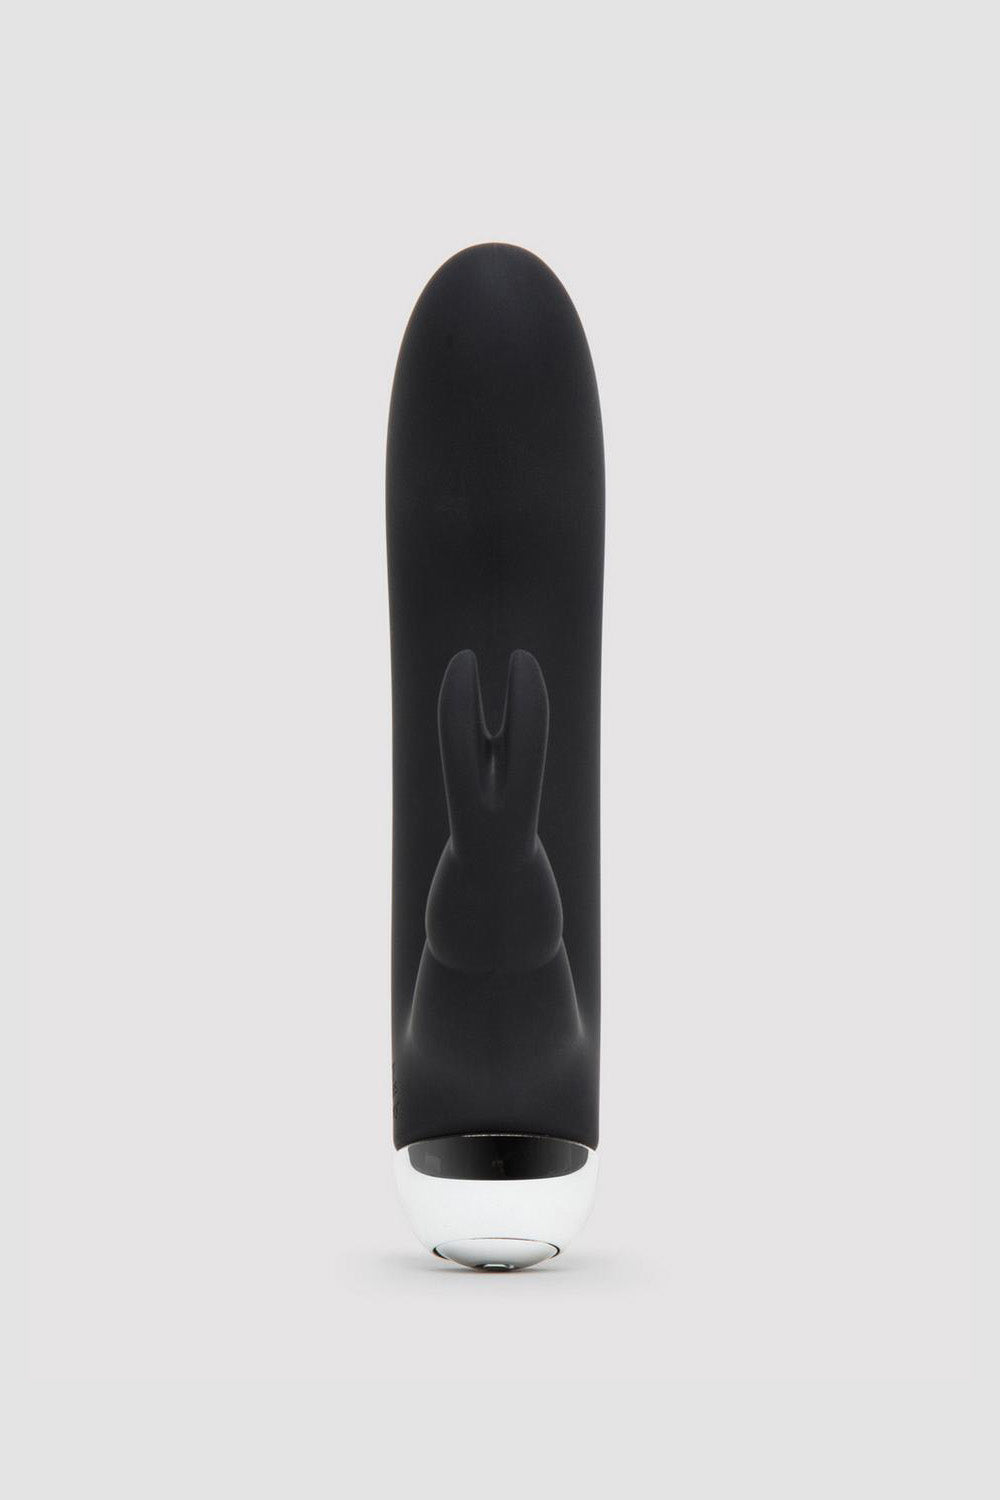 Fifty Shades of Grey Greedy Girl Rechargeable Mini Rabbit Vibrator, 5.5 Inches